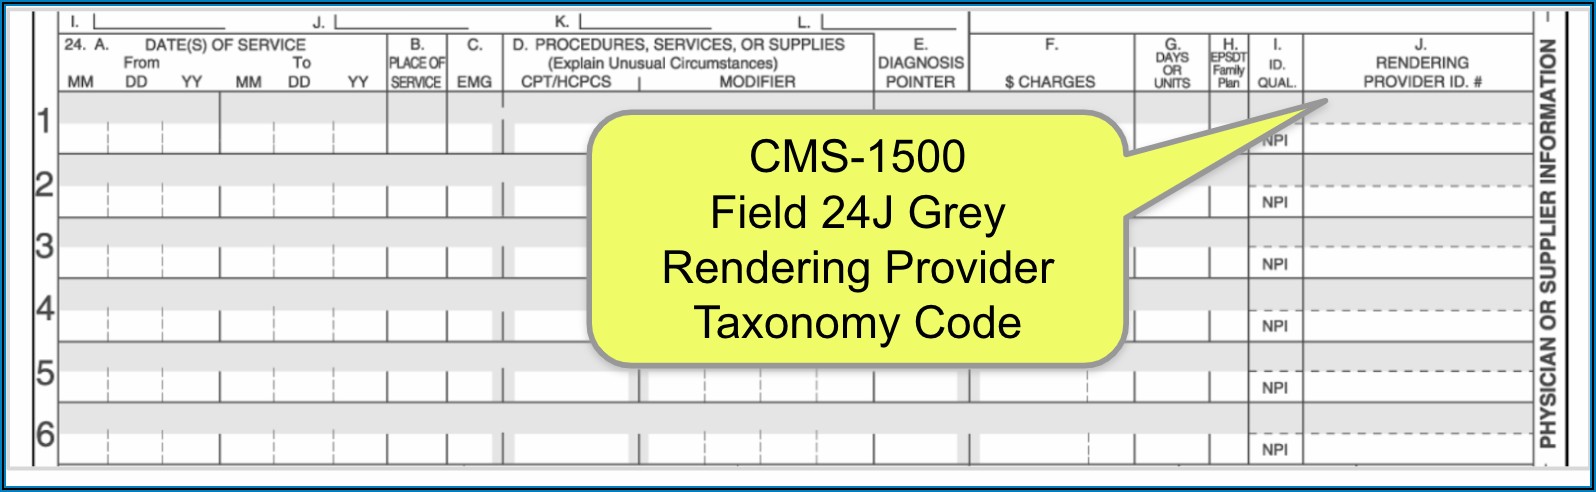 Hcfa 1500 Claim Form Place Of Service Codes